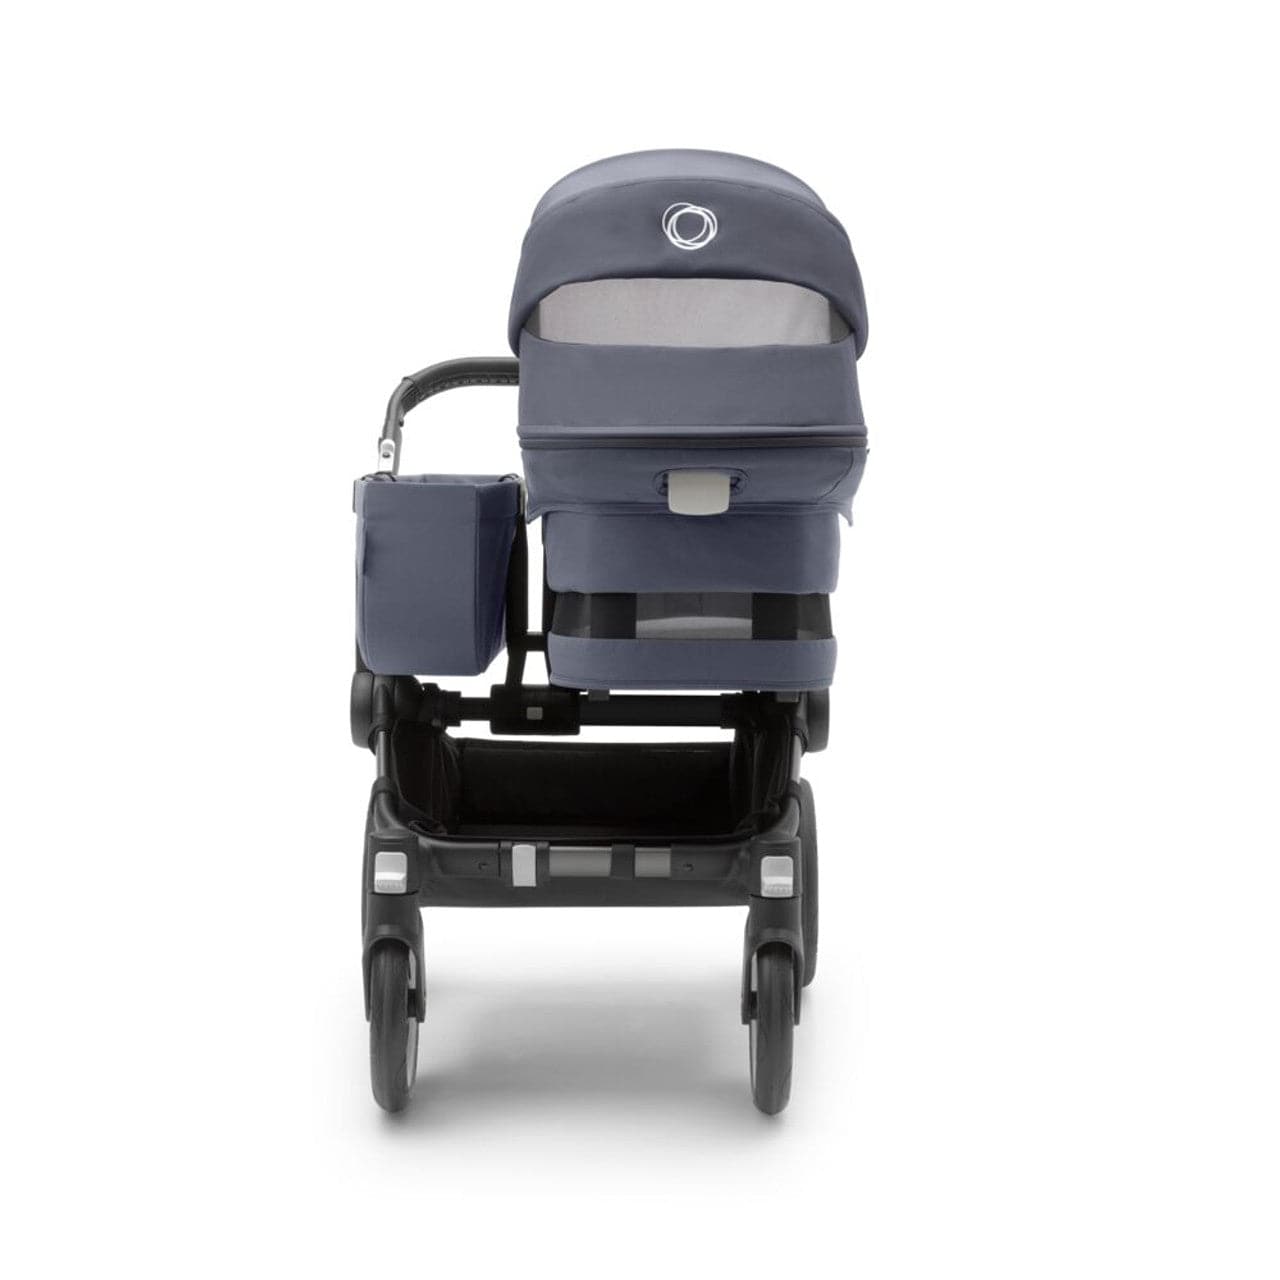 Bugaboo Donkey 5 Duo Pushchair on Graphite/Black Chassis - Choose Your Colour -  | For Your Little One